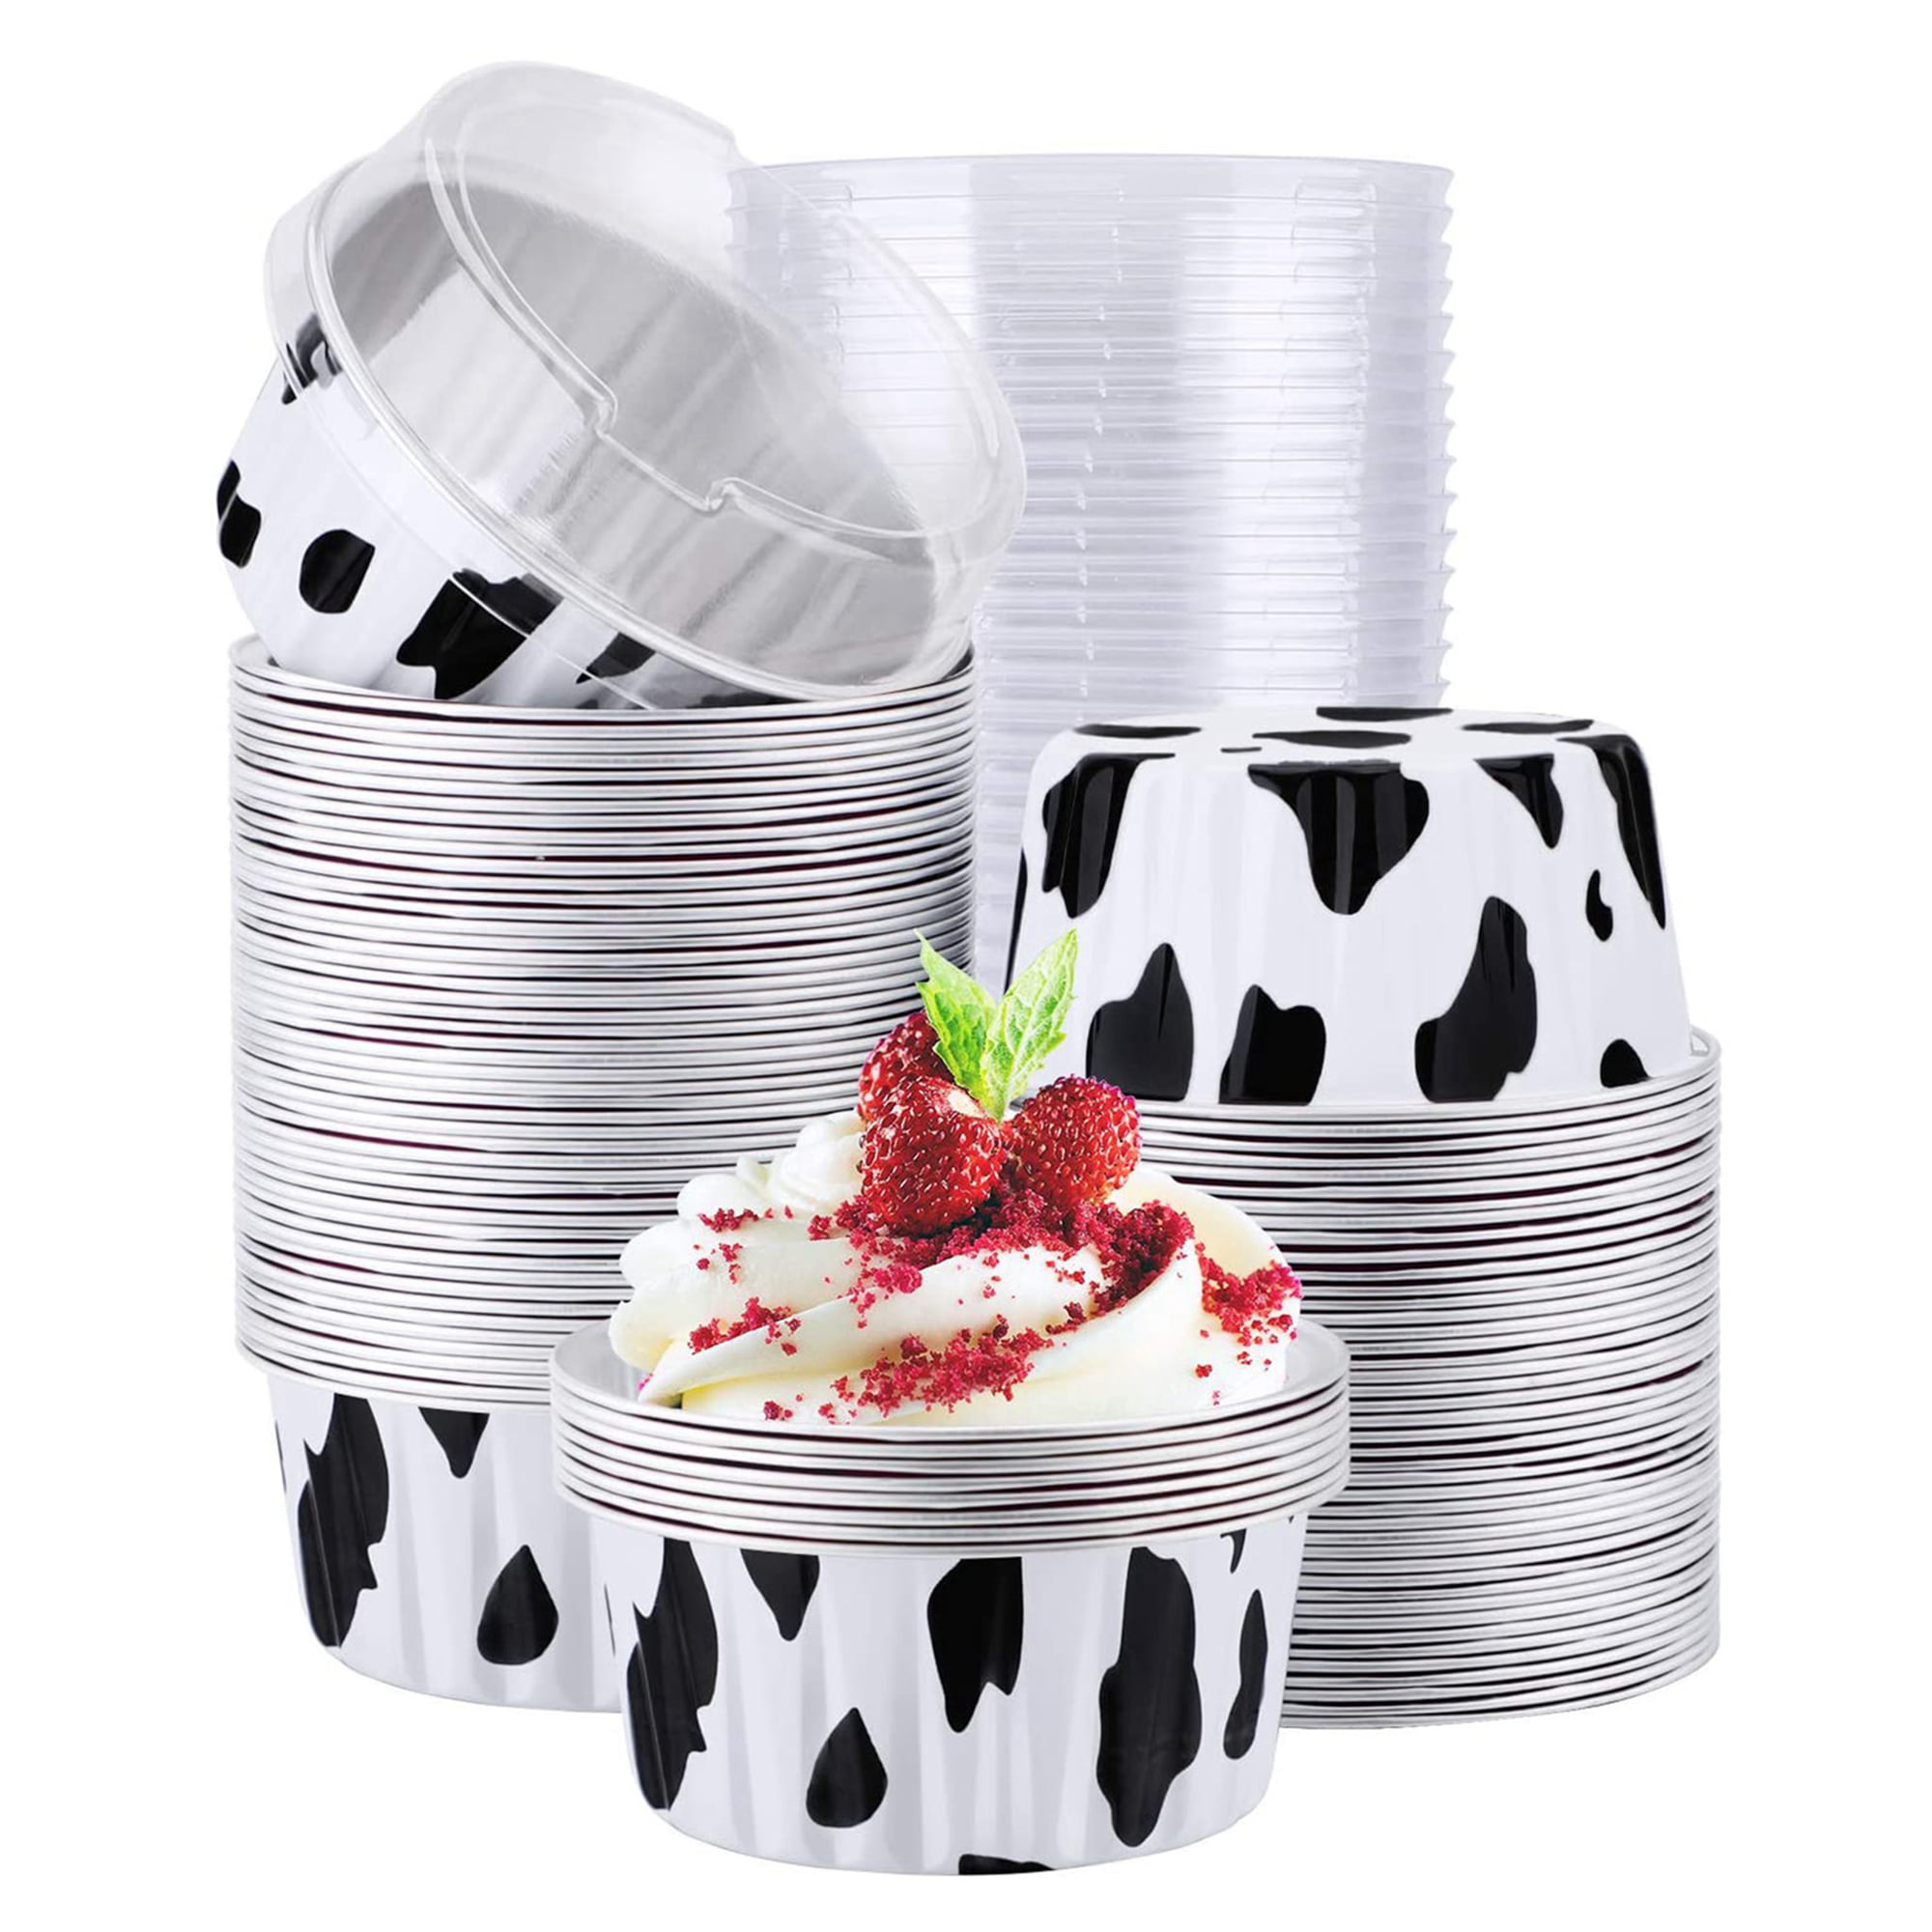 Cake Cups 100 PCS Disposable Aluminum Foil Cupcake Cups with Lids for